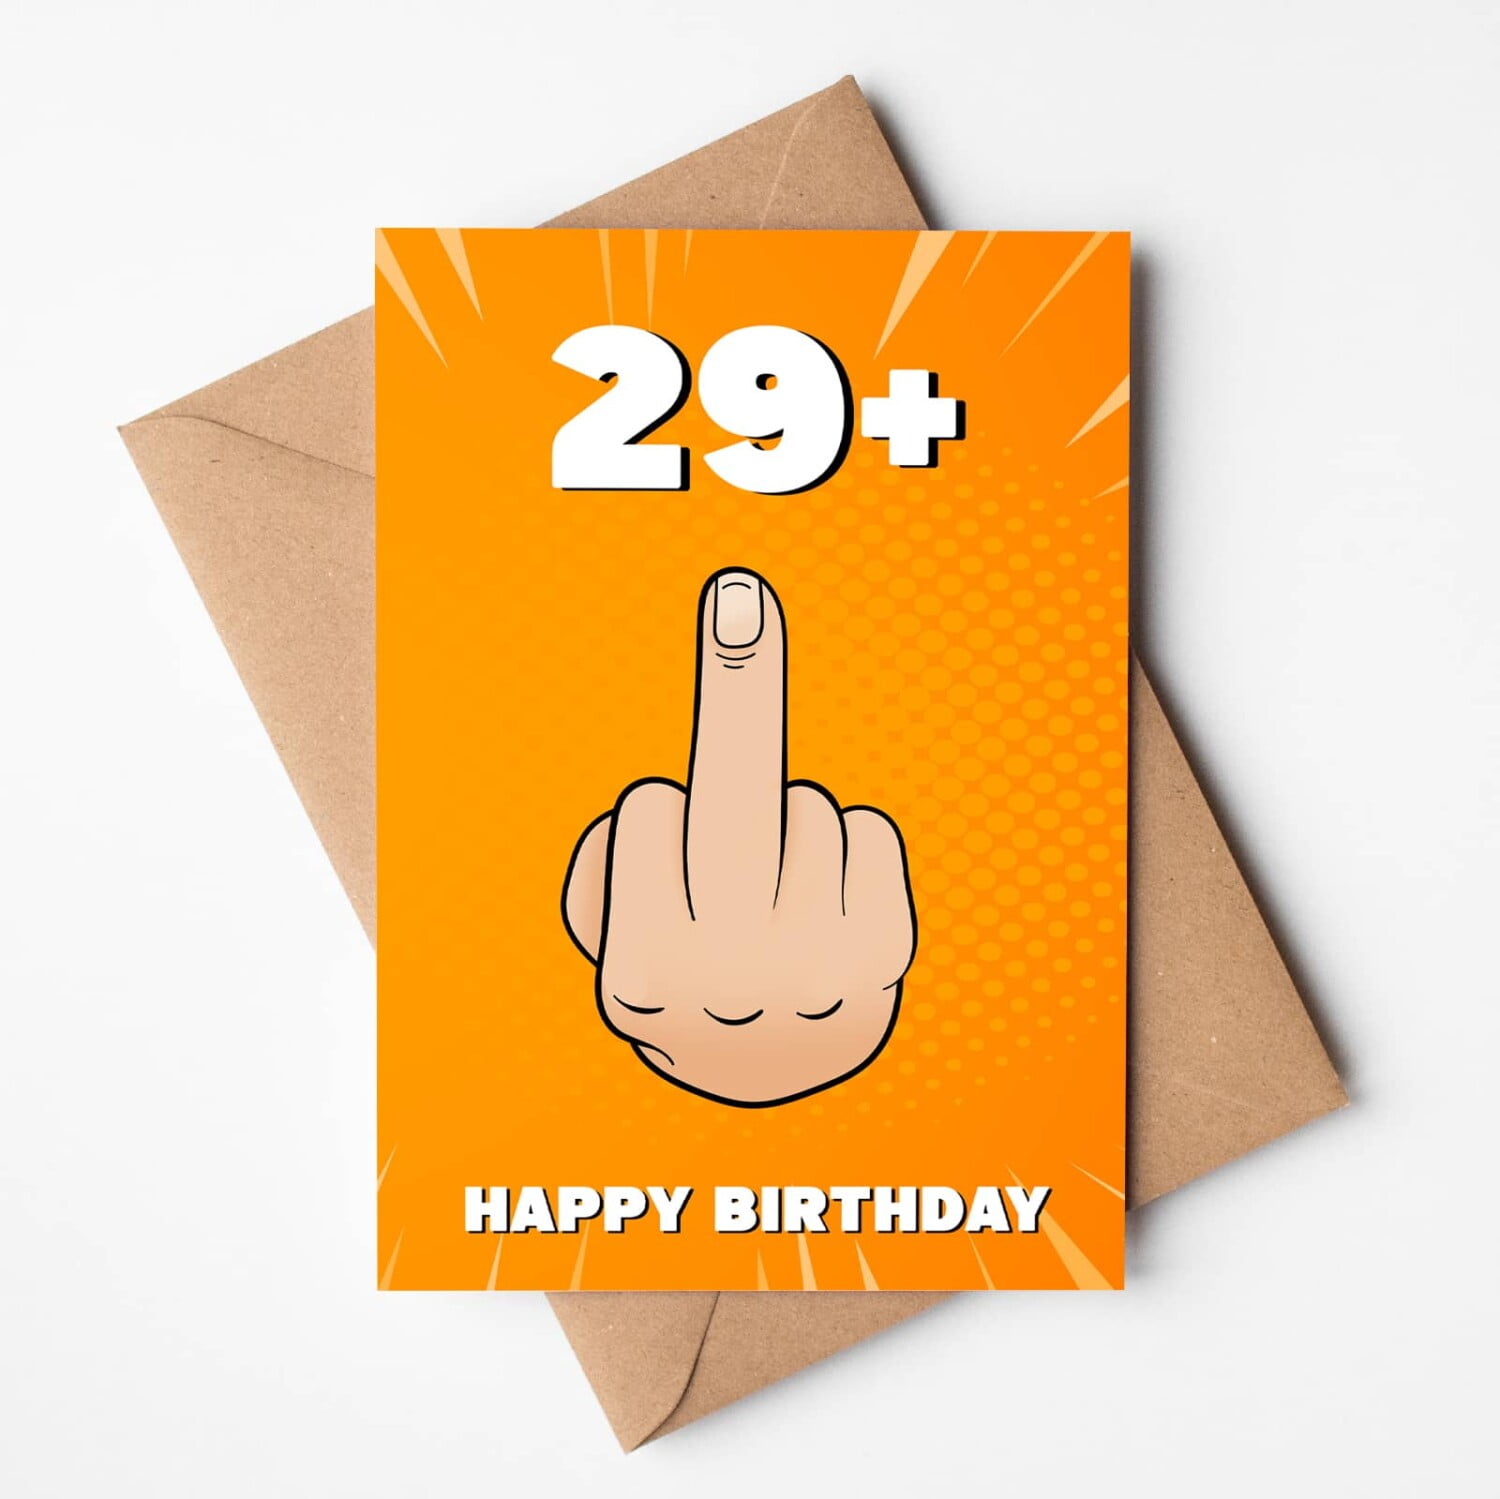 29 plus birthday Card, Printing in County Monaghan, Ireland by Design Gaff